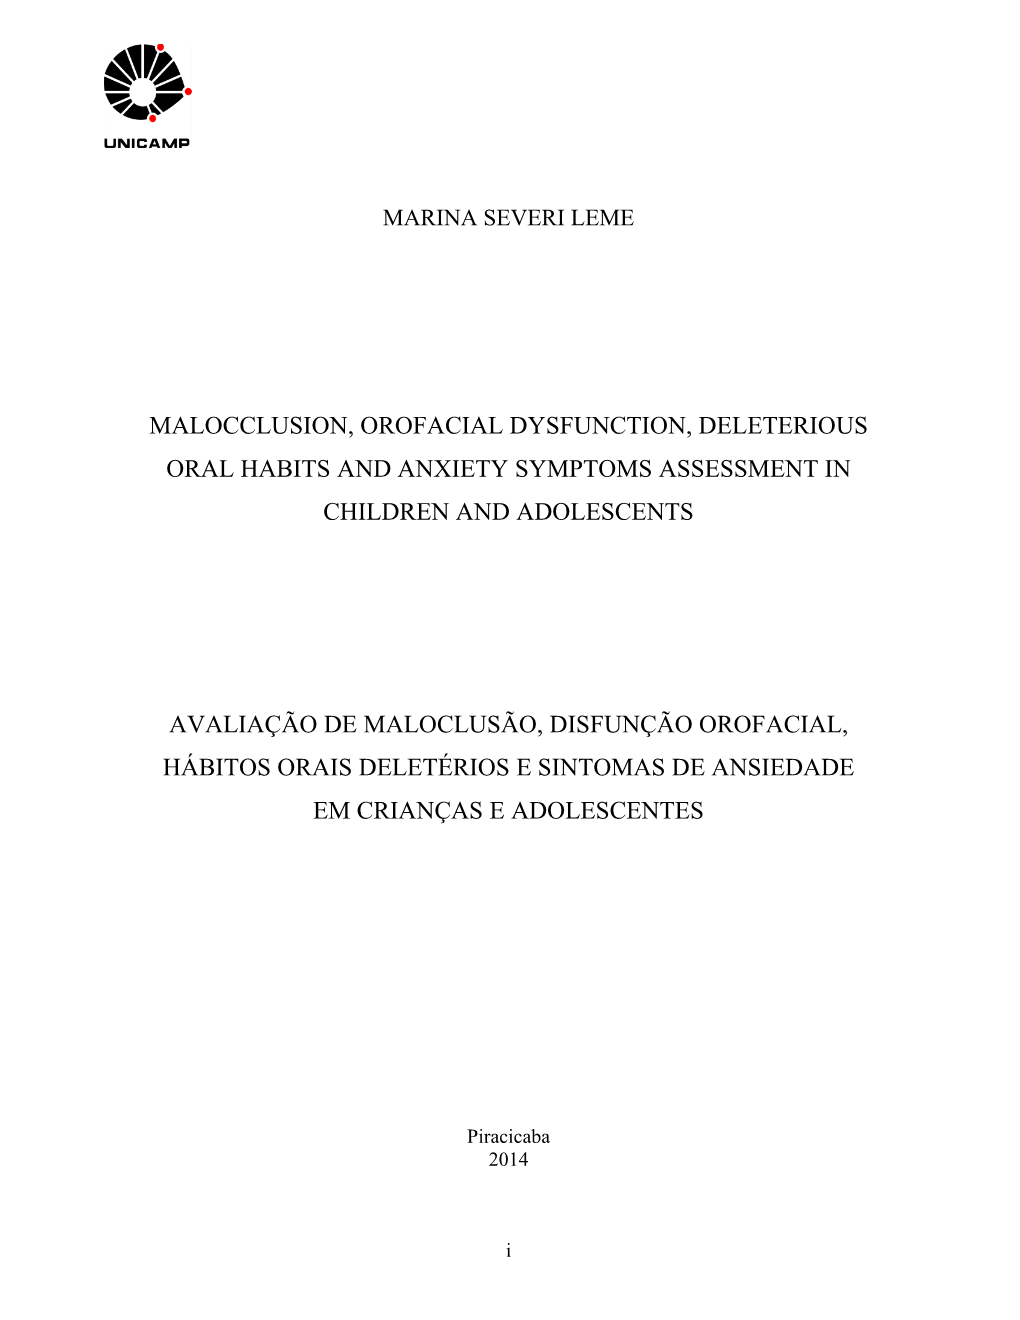 Malocclusion, Orofacial Dysfunction, Deleterious Oral Habits and Anxiety Symptoms Assessment in Children and Adolescents Avalia